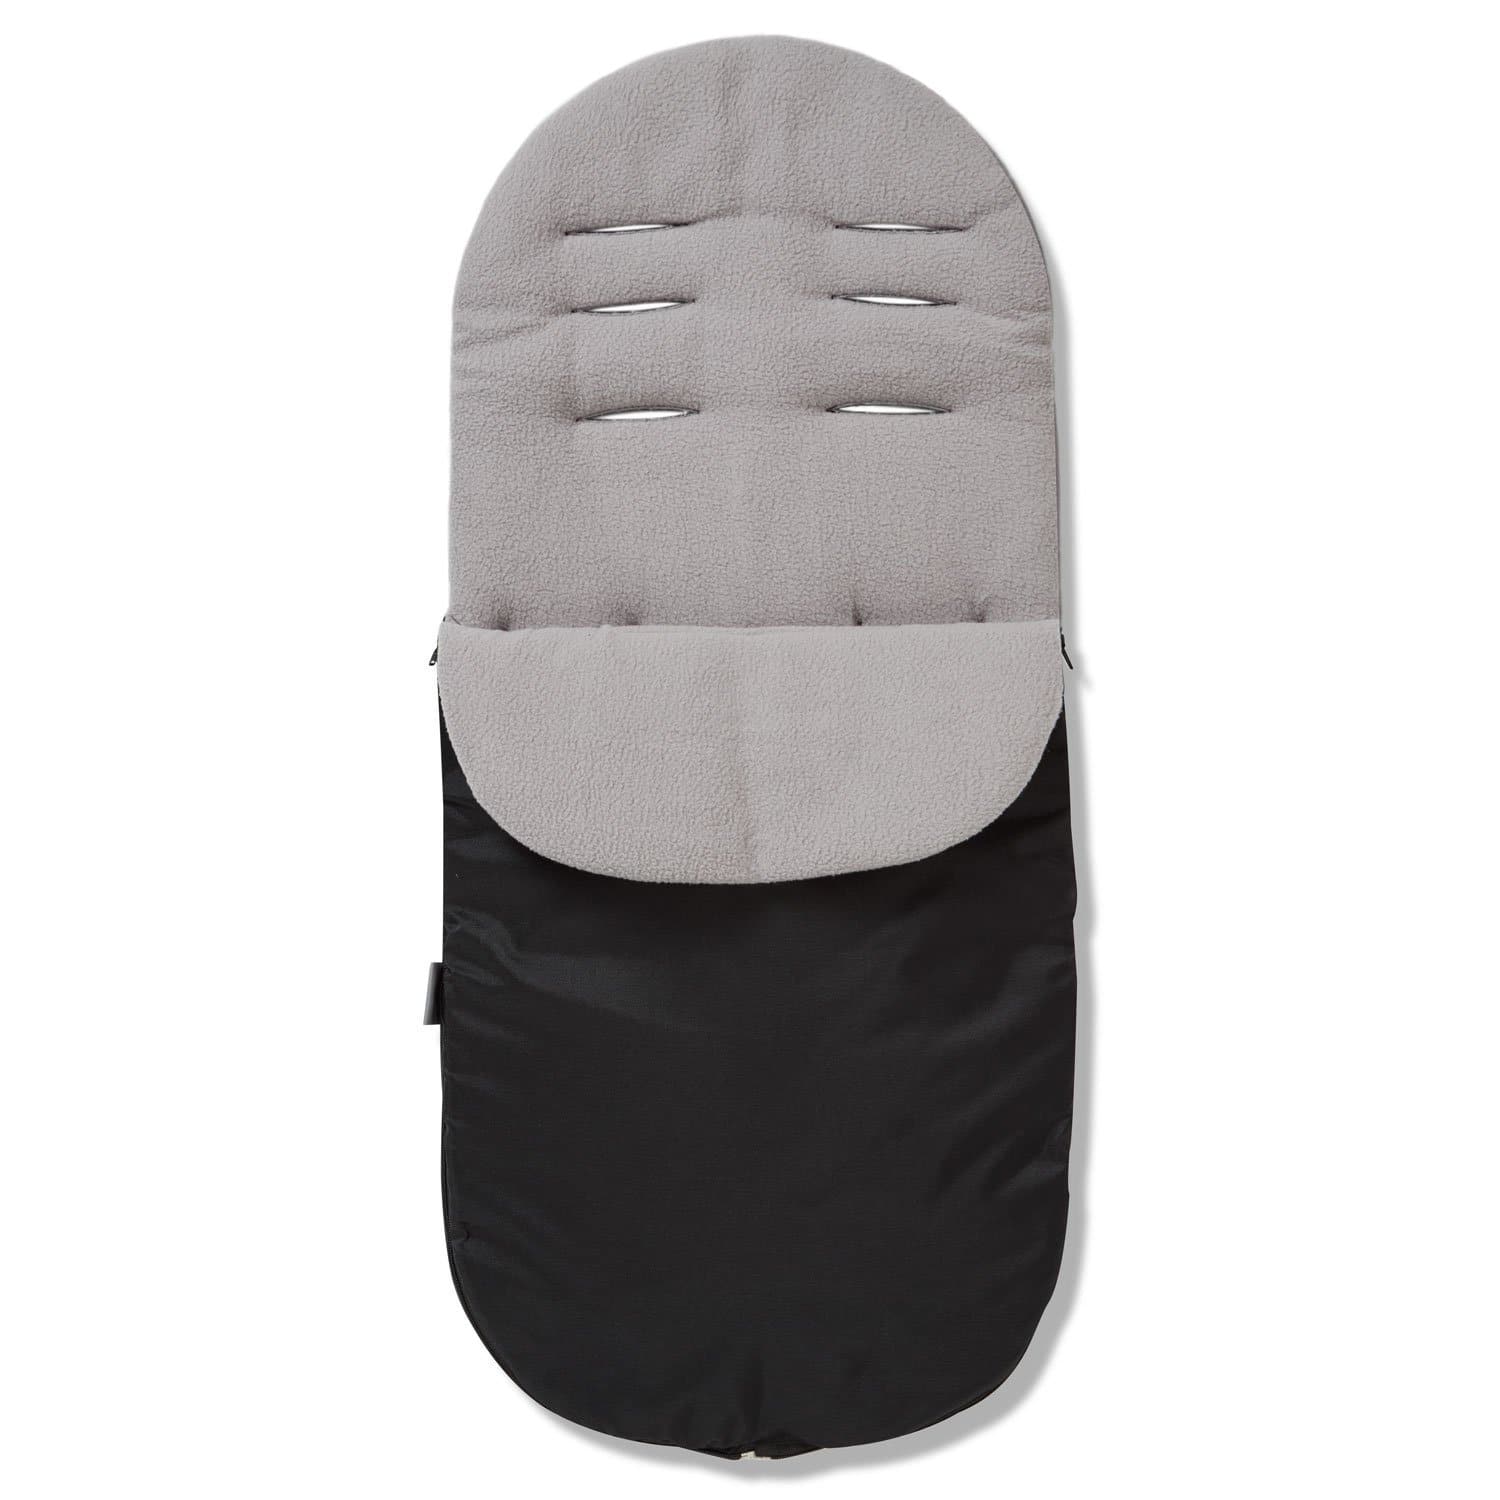 Footmuff / Cosy Toes Compatible with Bumbleride - Grey / Fits All Models | For Your Little One